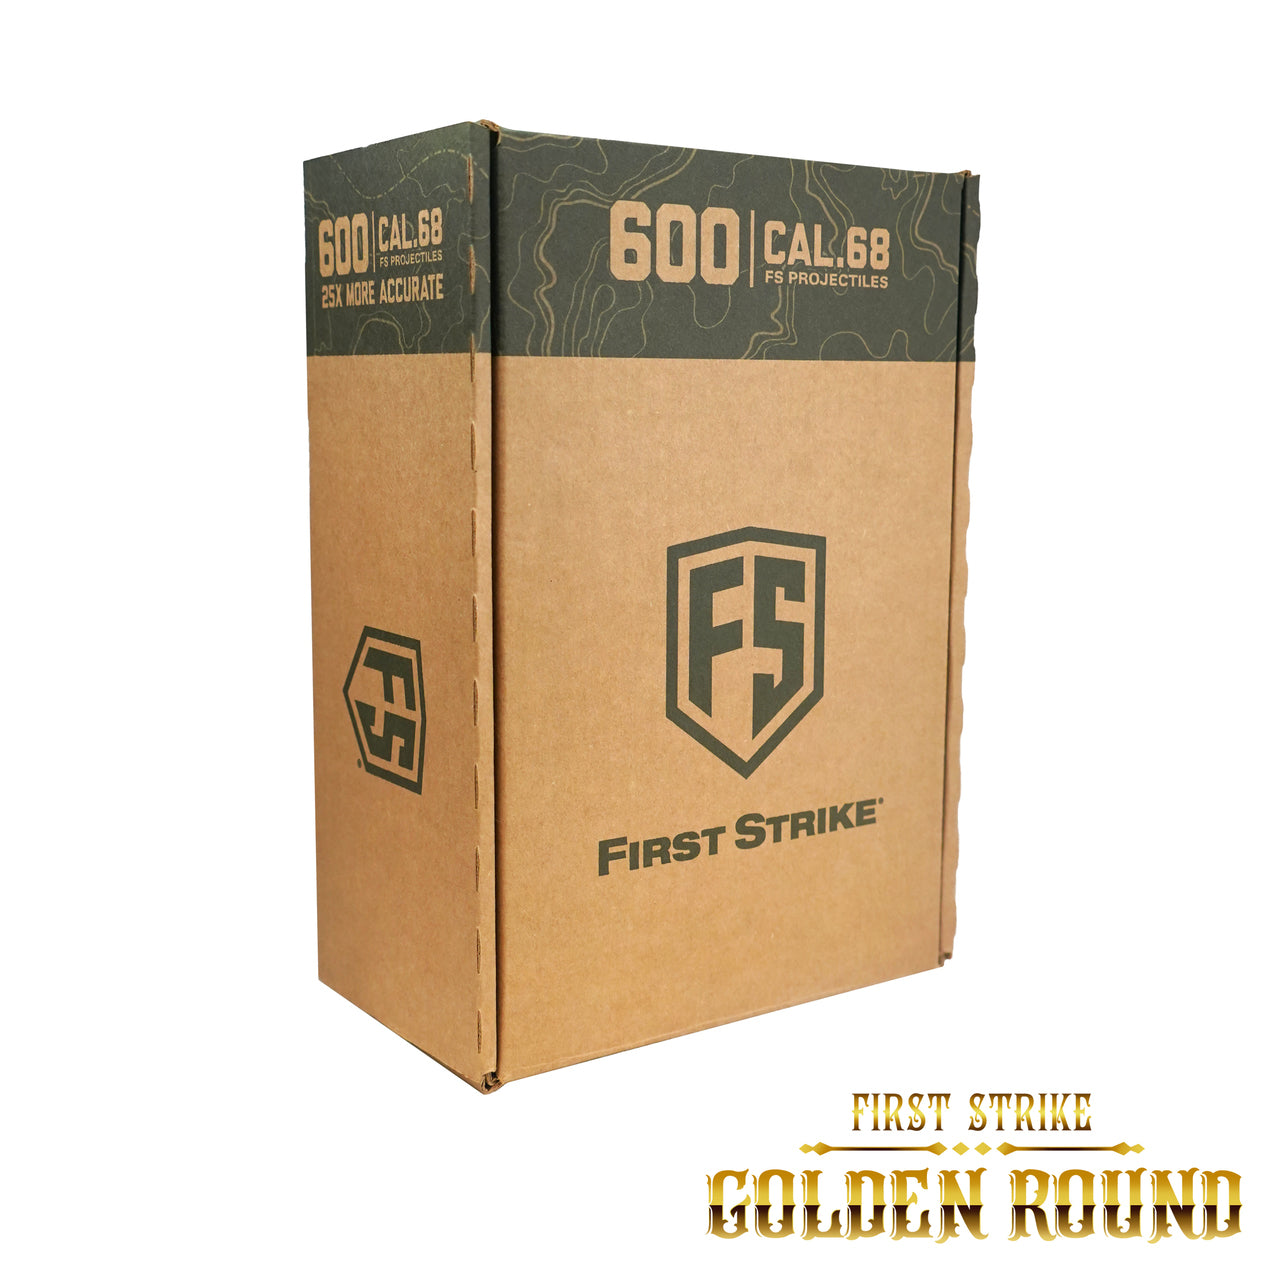 First Strike Rounds - 600 Count - Smoke/Pink - Yellow (GOLDEN ROUND SWEEPSTAKES) - First Strike